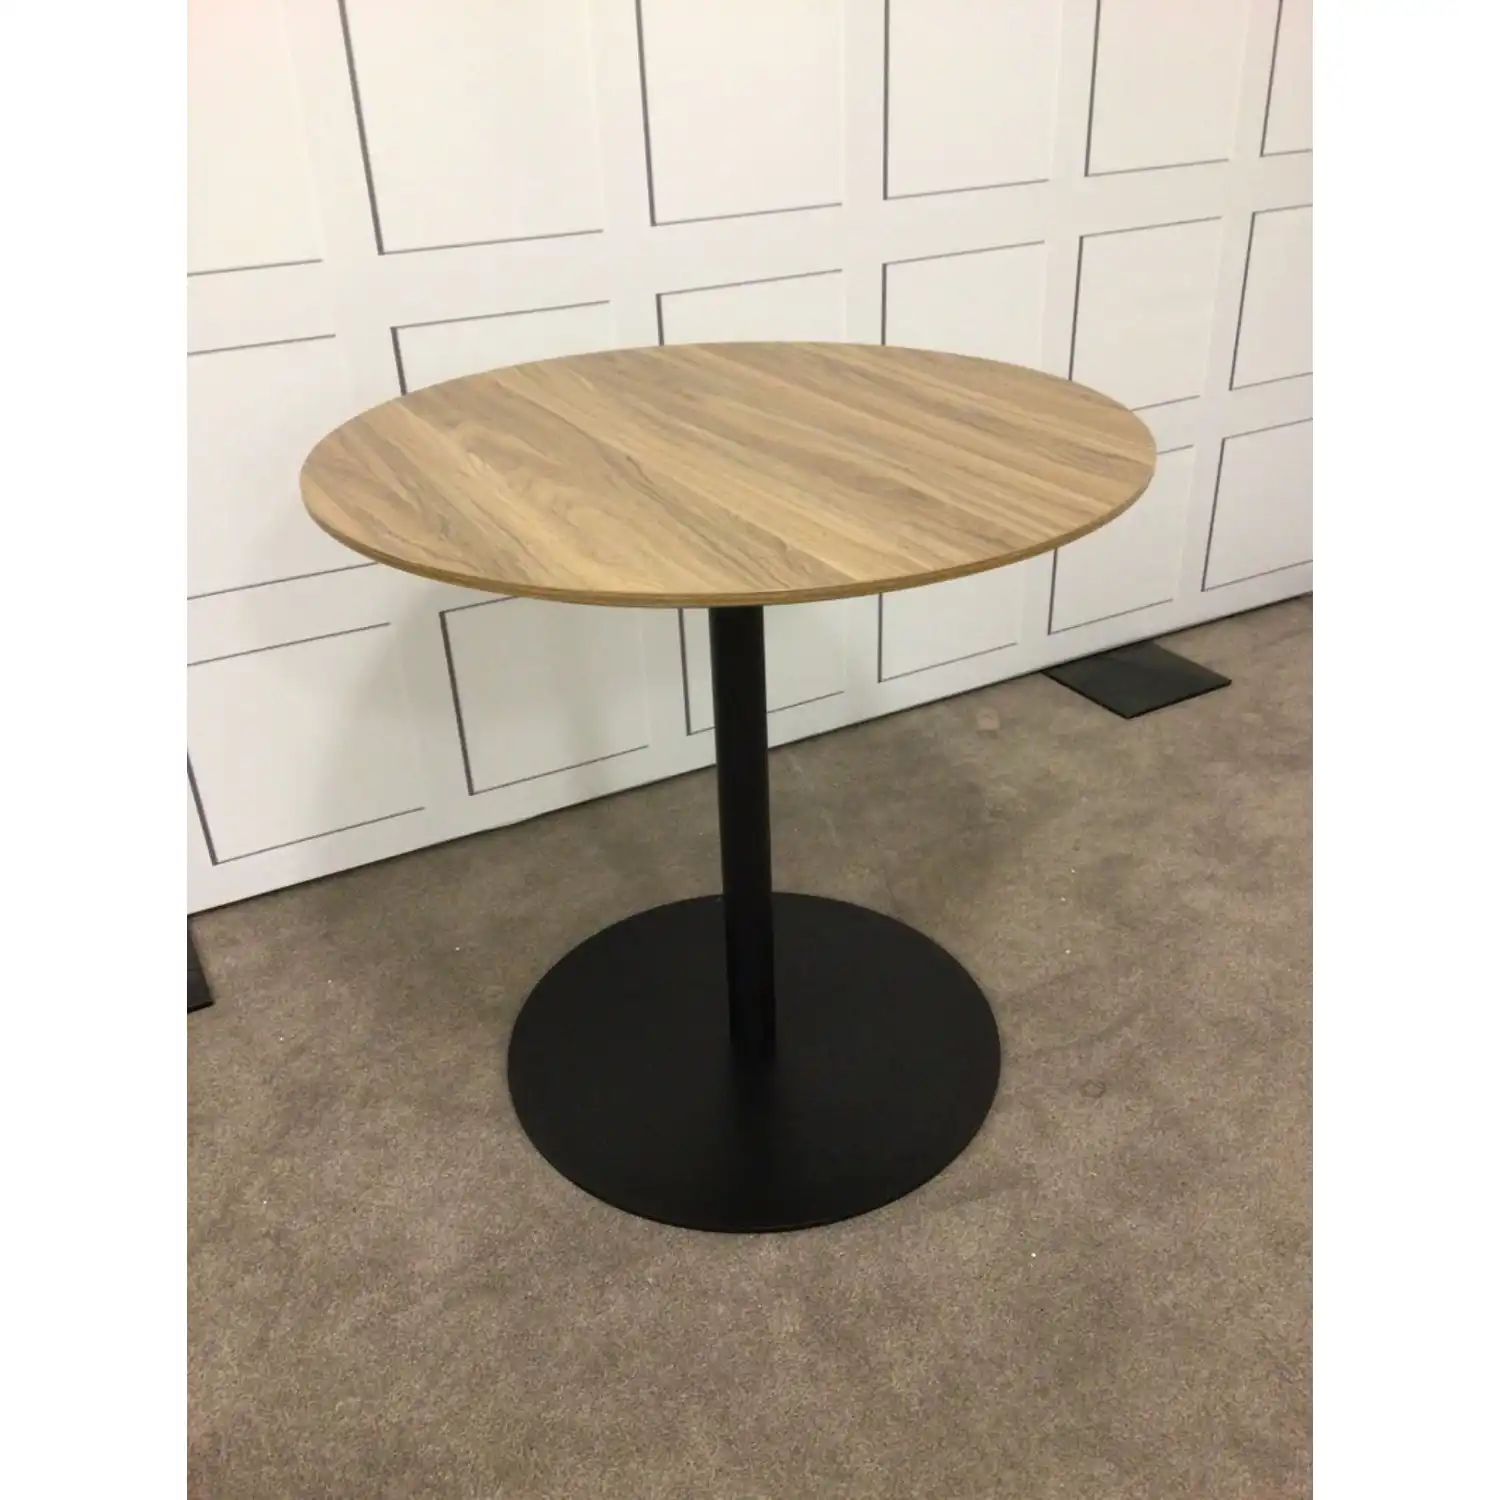 Small Round Dining Table Grey Base Scratch Resistant Top